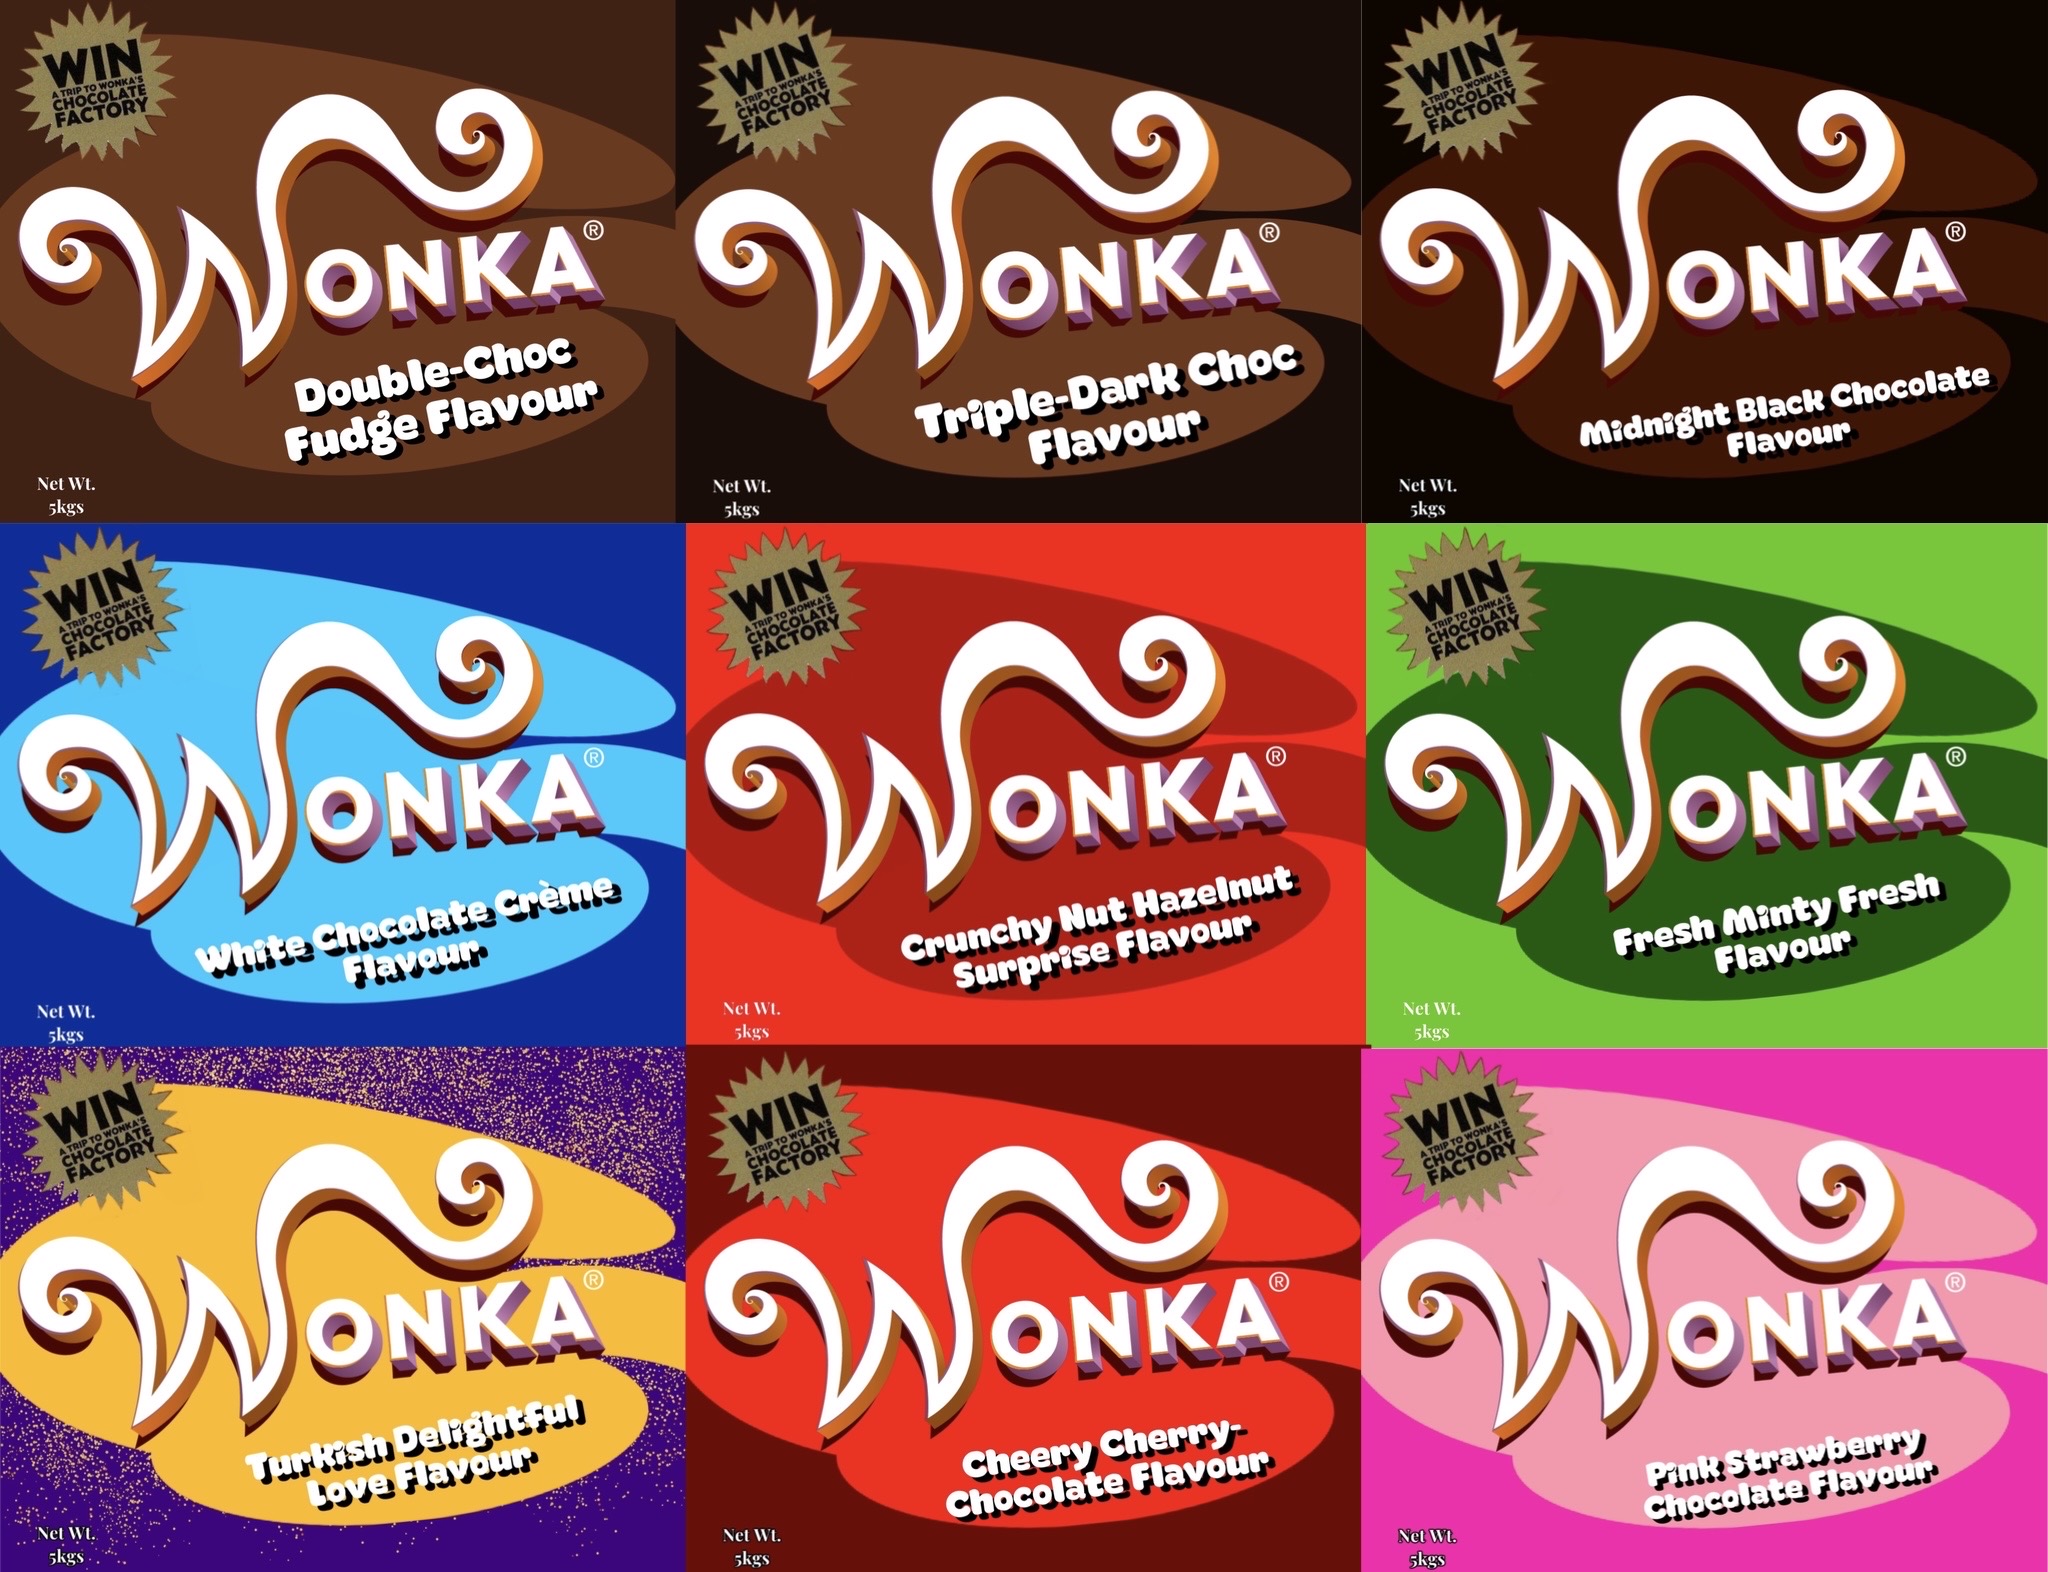 Wall of Wonka Bar Wrappers (Custom) by BraedimusSupreme95 on DeviantArt